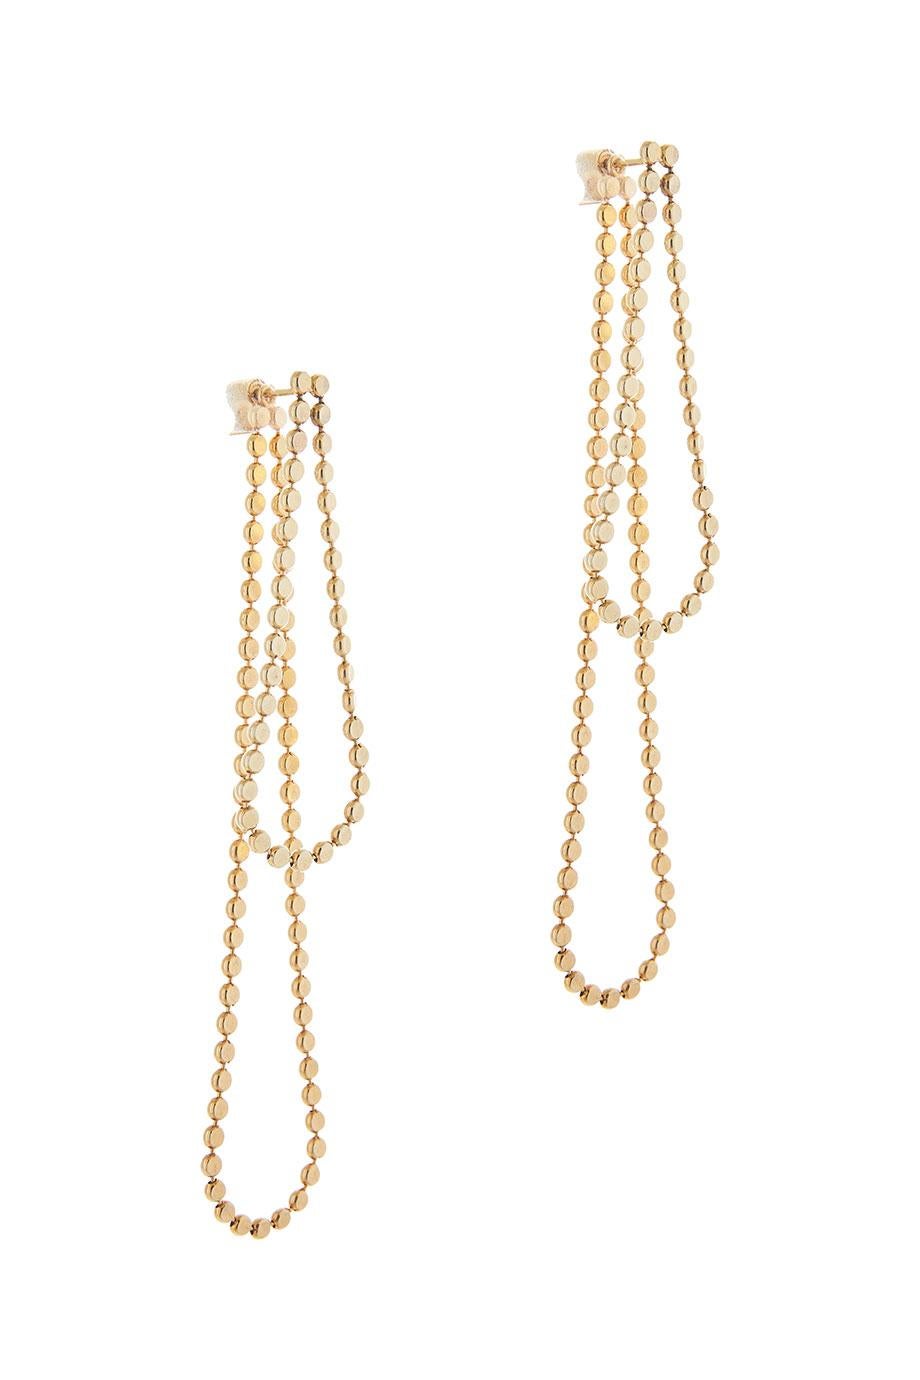  Earrings Chains Drops Round Motif Chain 18K Gold-Plated Silver Greek Earrings For Sale 3